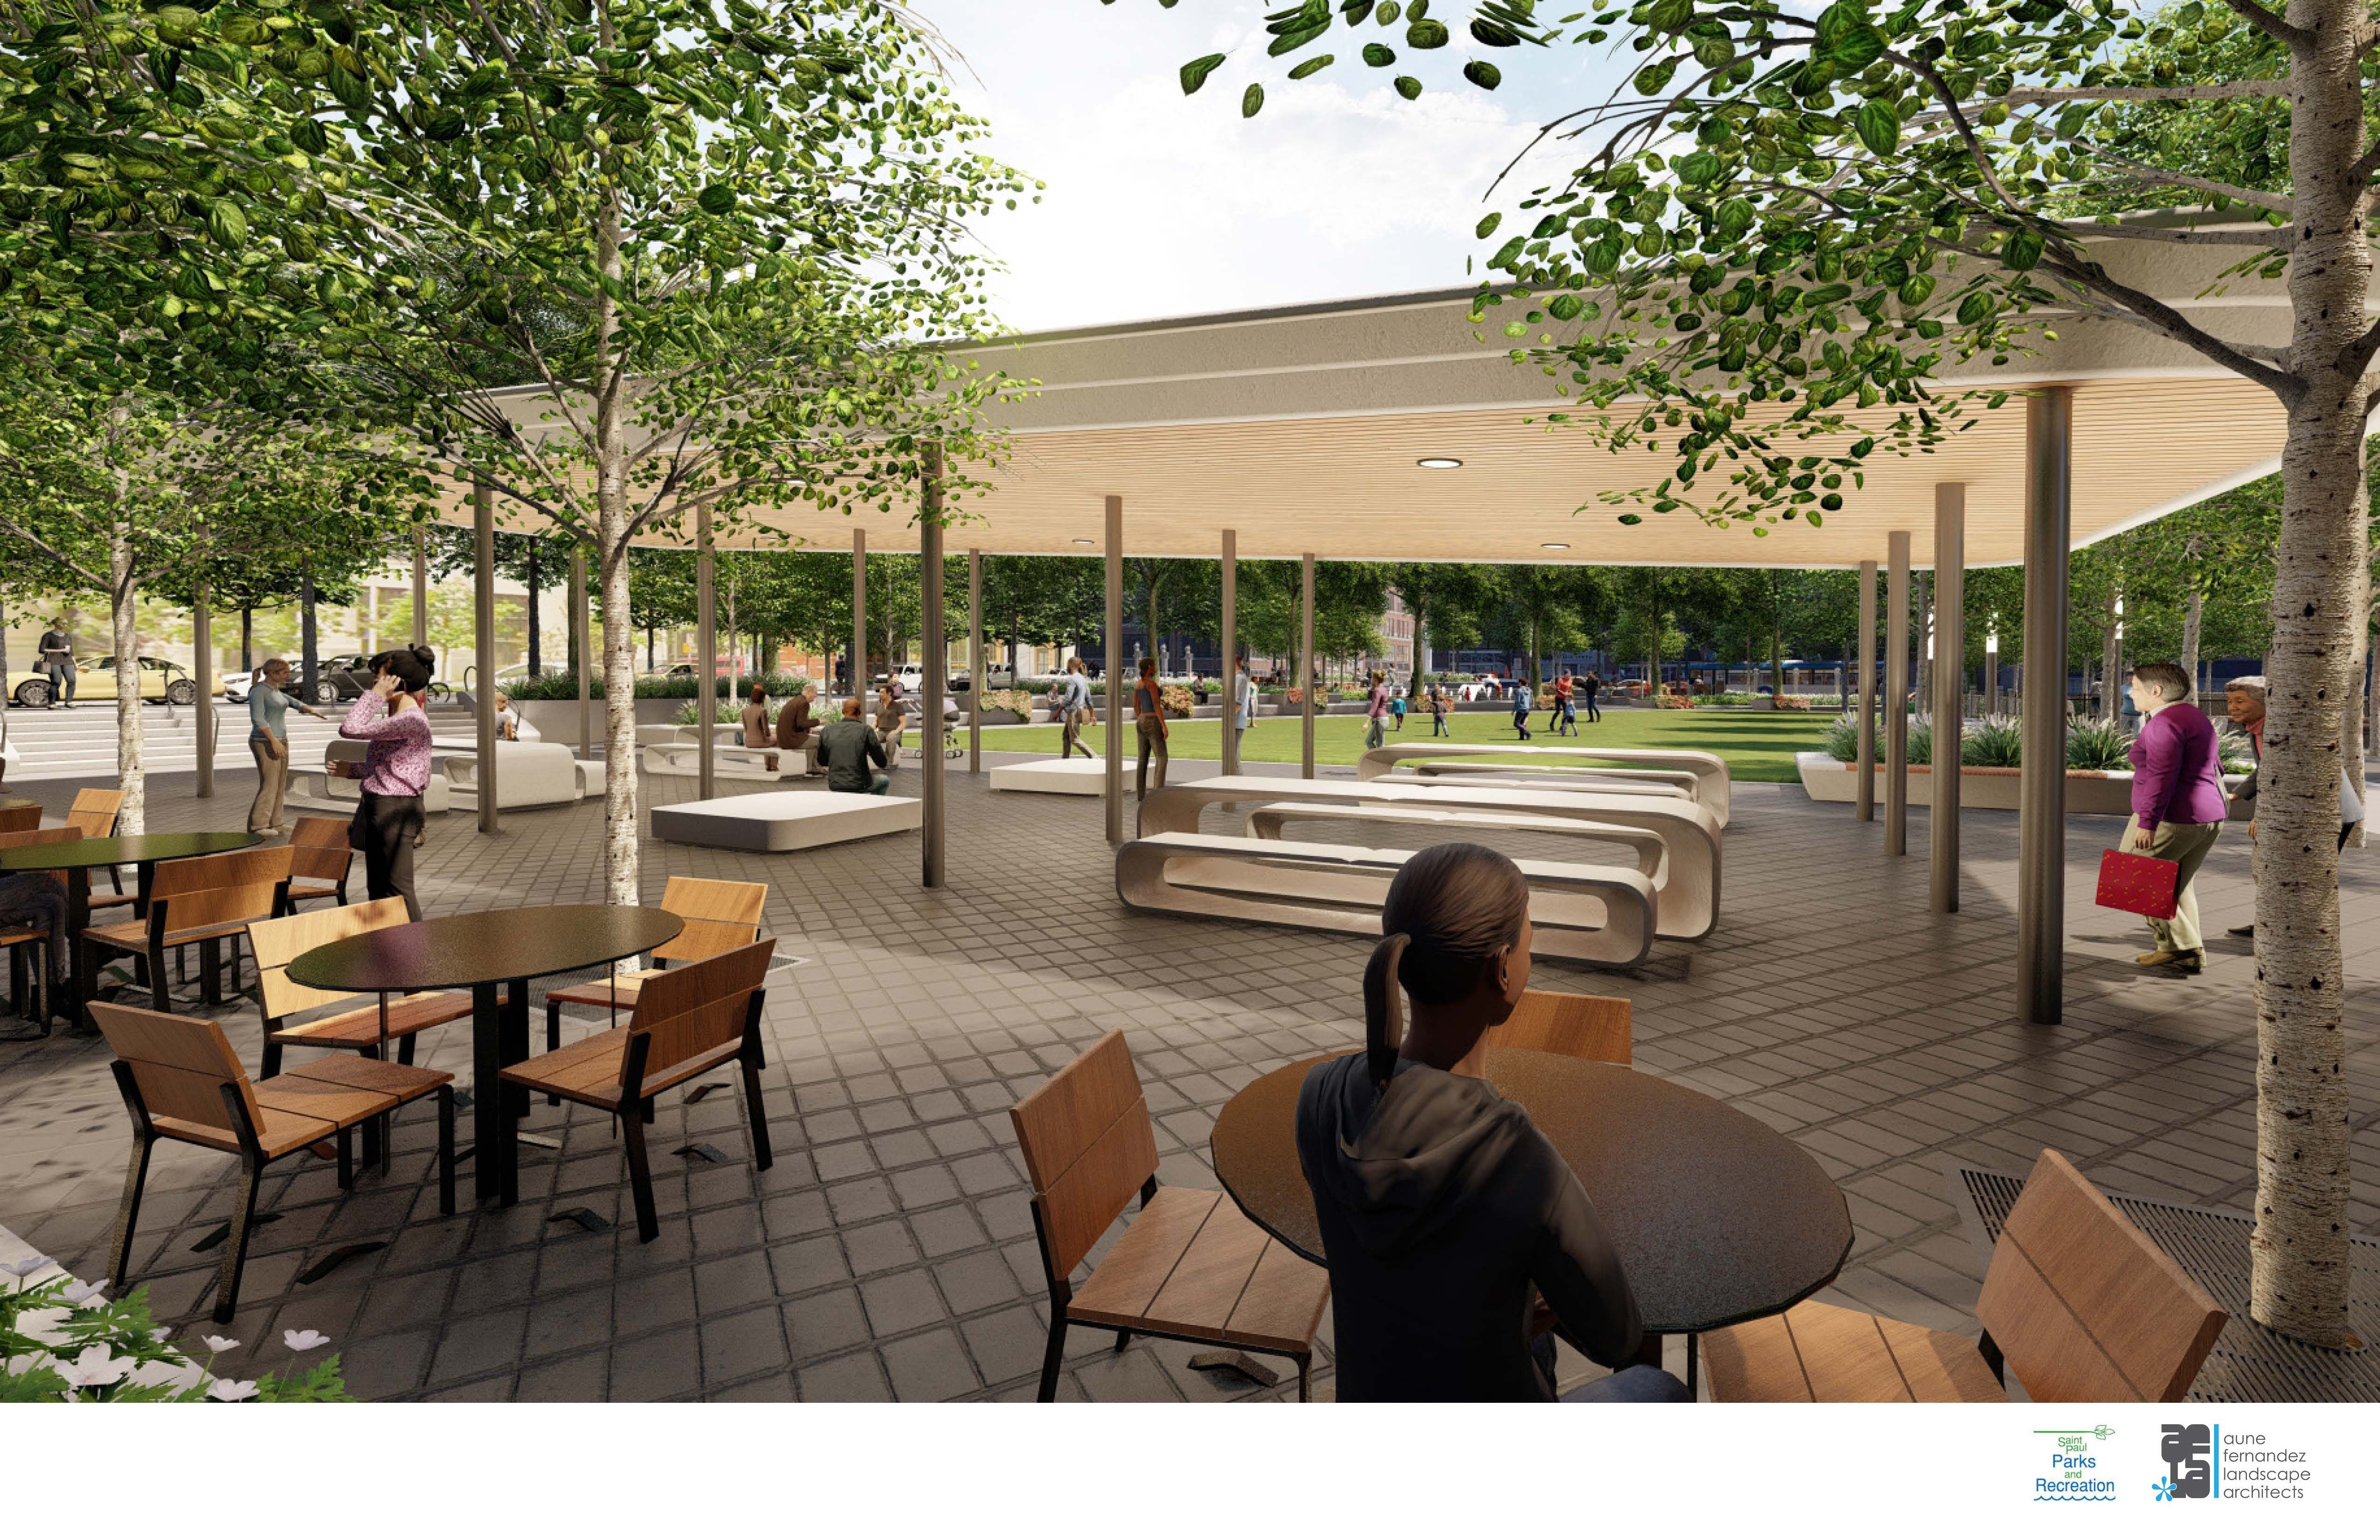 A rendering of a covered seating area at a park with picnic and patio style tables